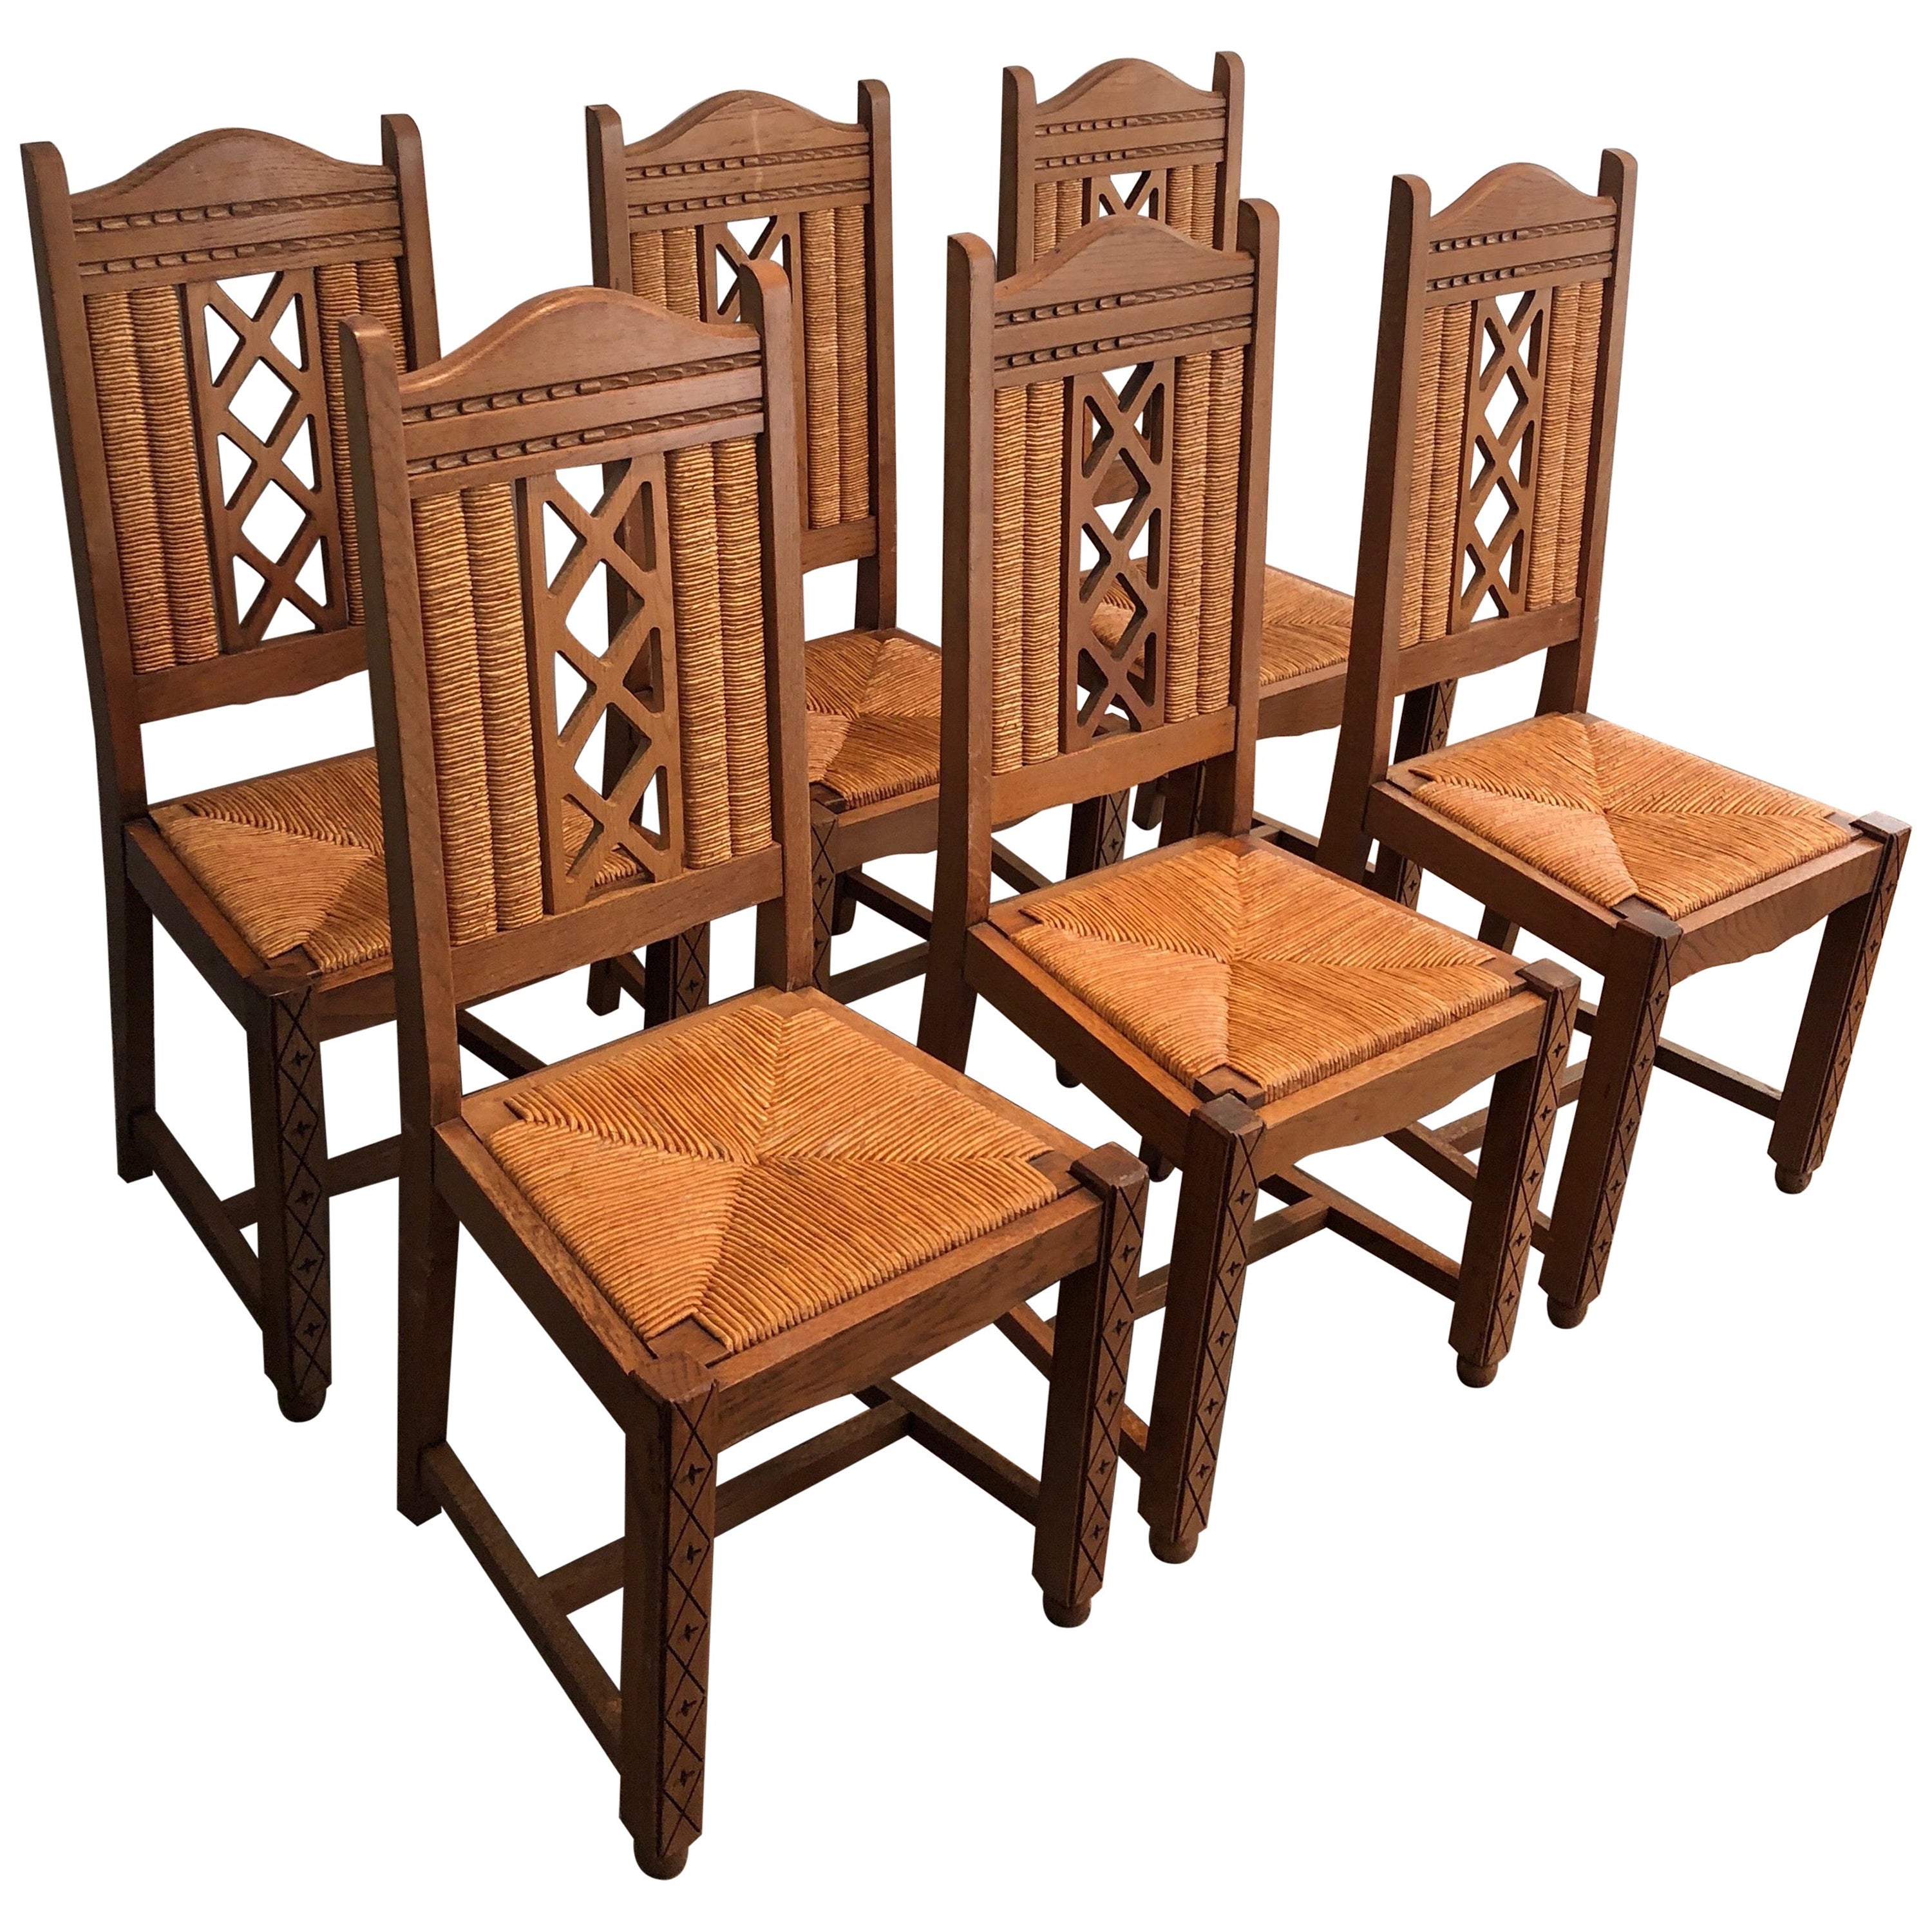 Set of 6 Brutalist Chairs Made of Ash and Straw, French Work, Circa 1950 For Sale